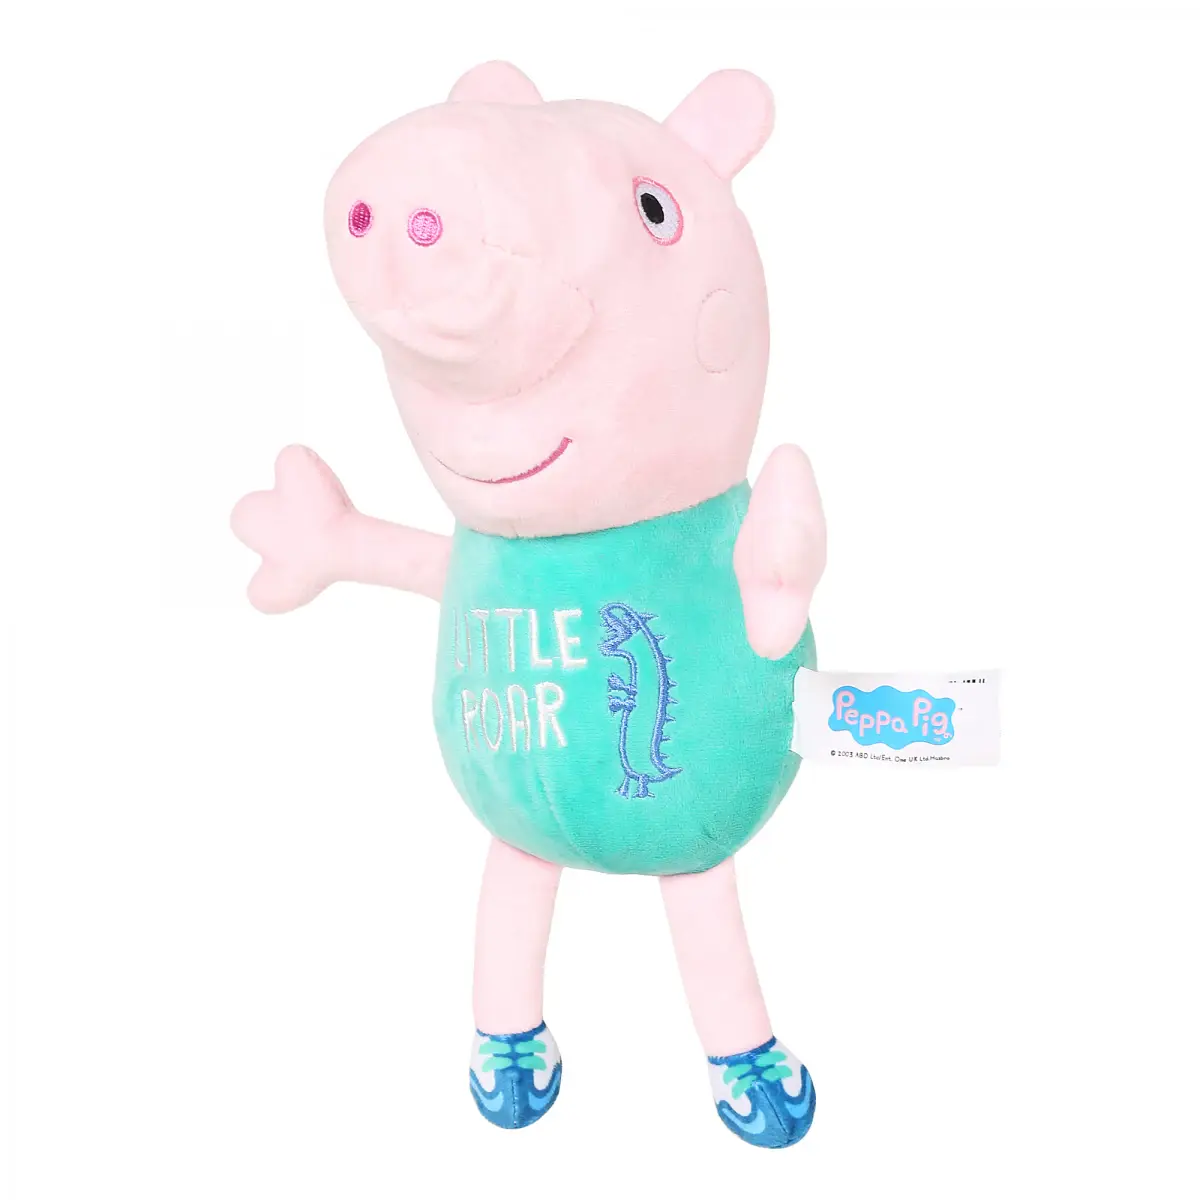 Peppa Pig Green George Soft Toy for Kids, 30cm, 18M+